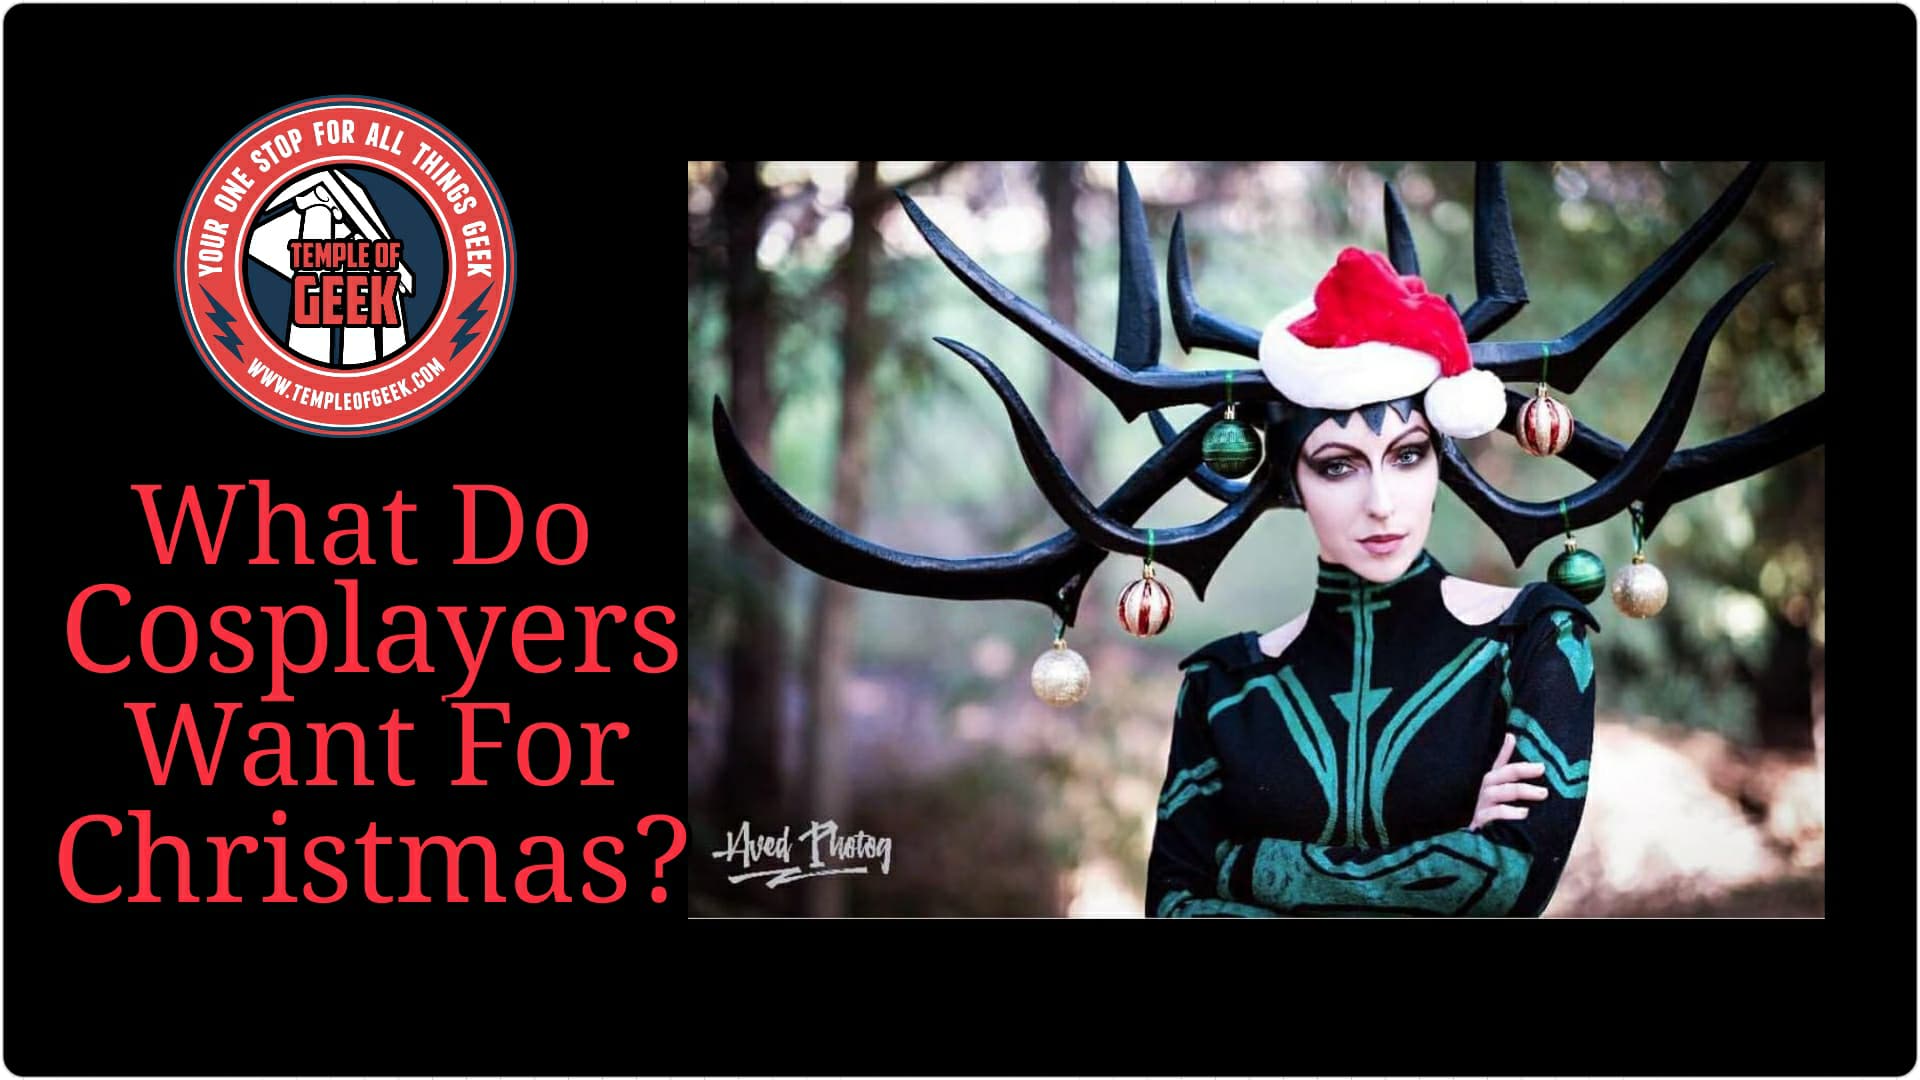 Cosplayers Share Their Holiday Wish List!